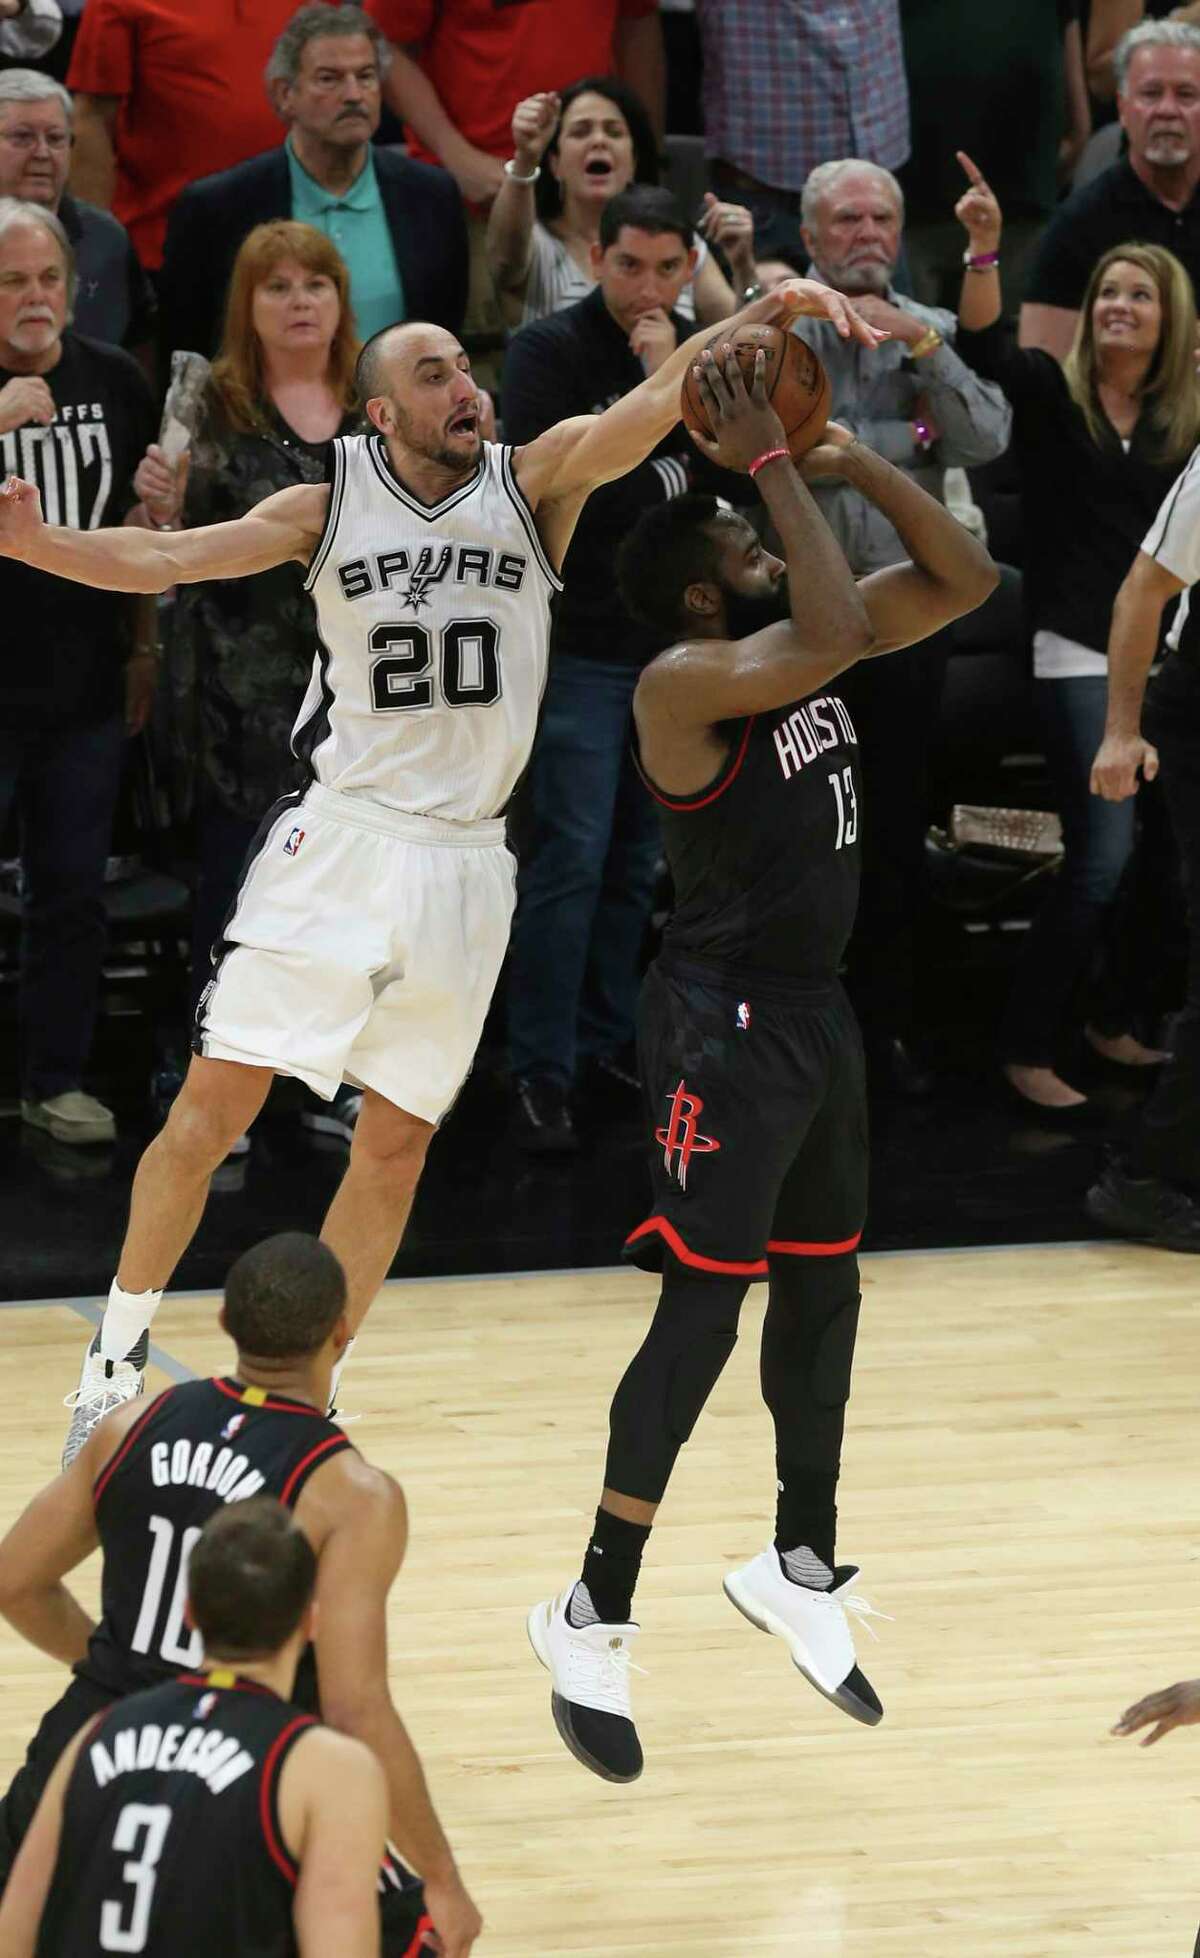 San Antonio Spurs’ Manu Ginobili blocks Houston Rockets’ James Harden at the end of overtime in the Western Conference semifinals at the AT&T Center, Tuesday, May 9, 2017. The Spurs won in overtime 110-107 to go up in the series, 3-2.